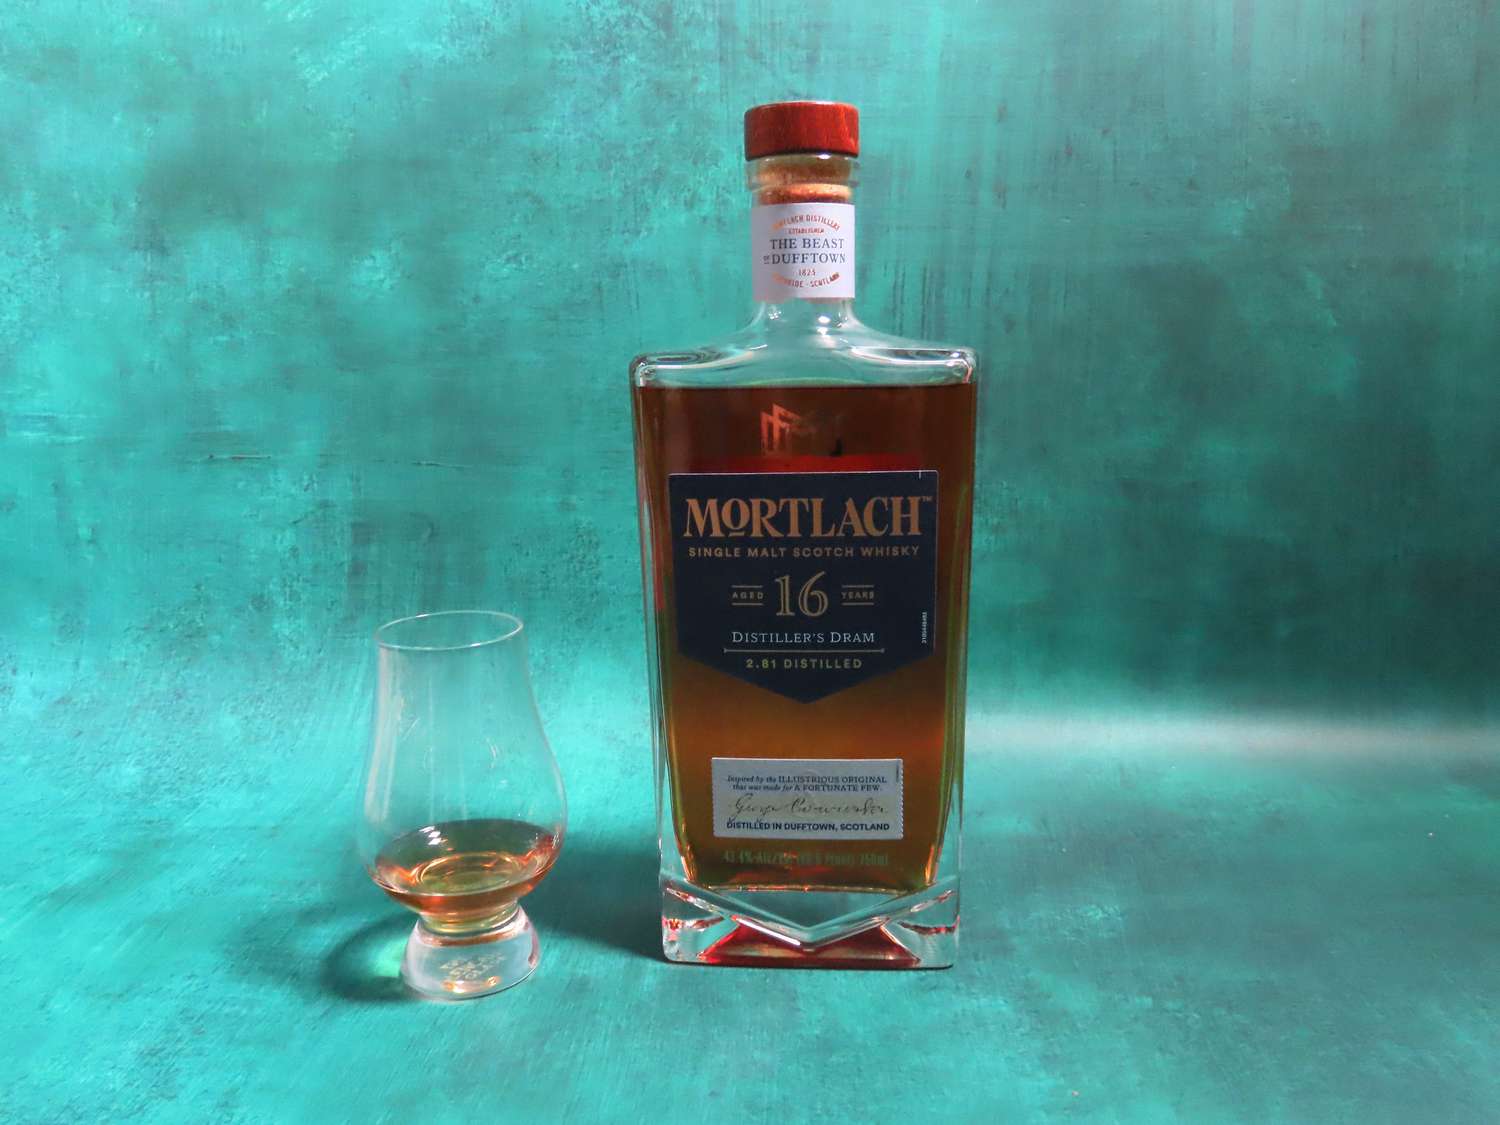 a bottle of mortlach on a blue surface with a whisky glass beside it